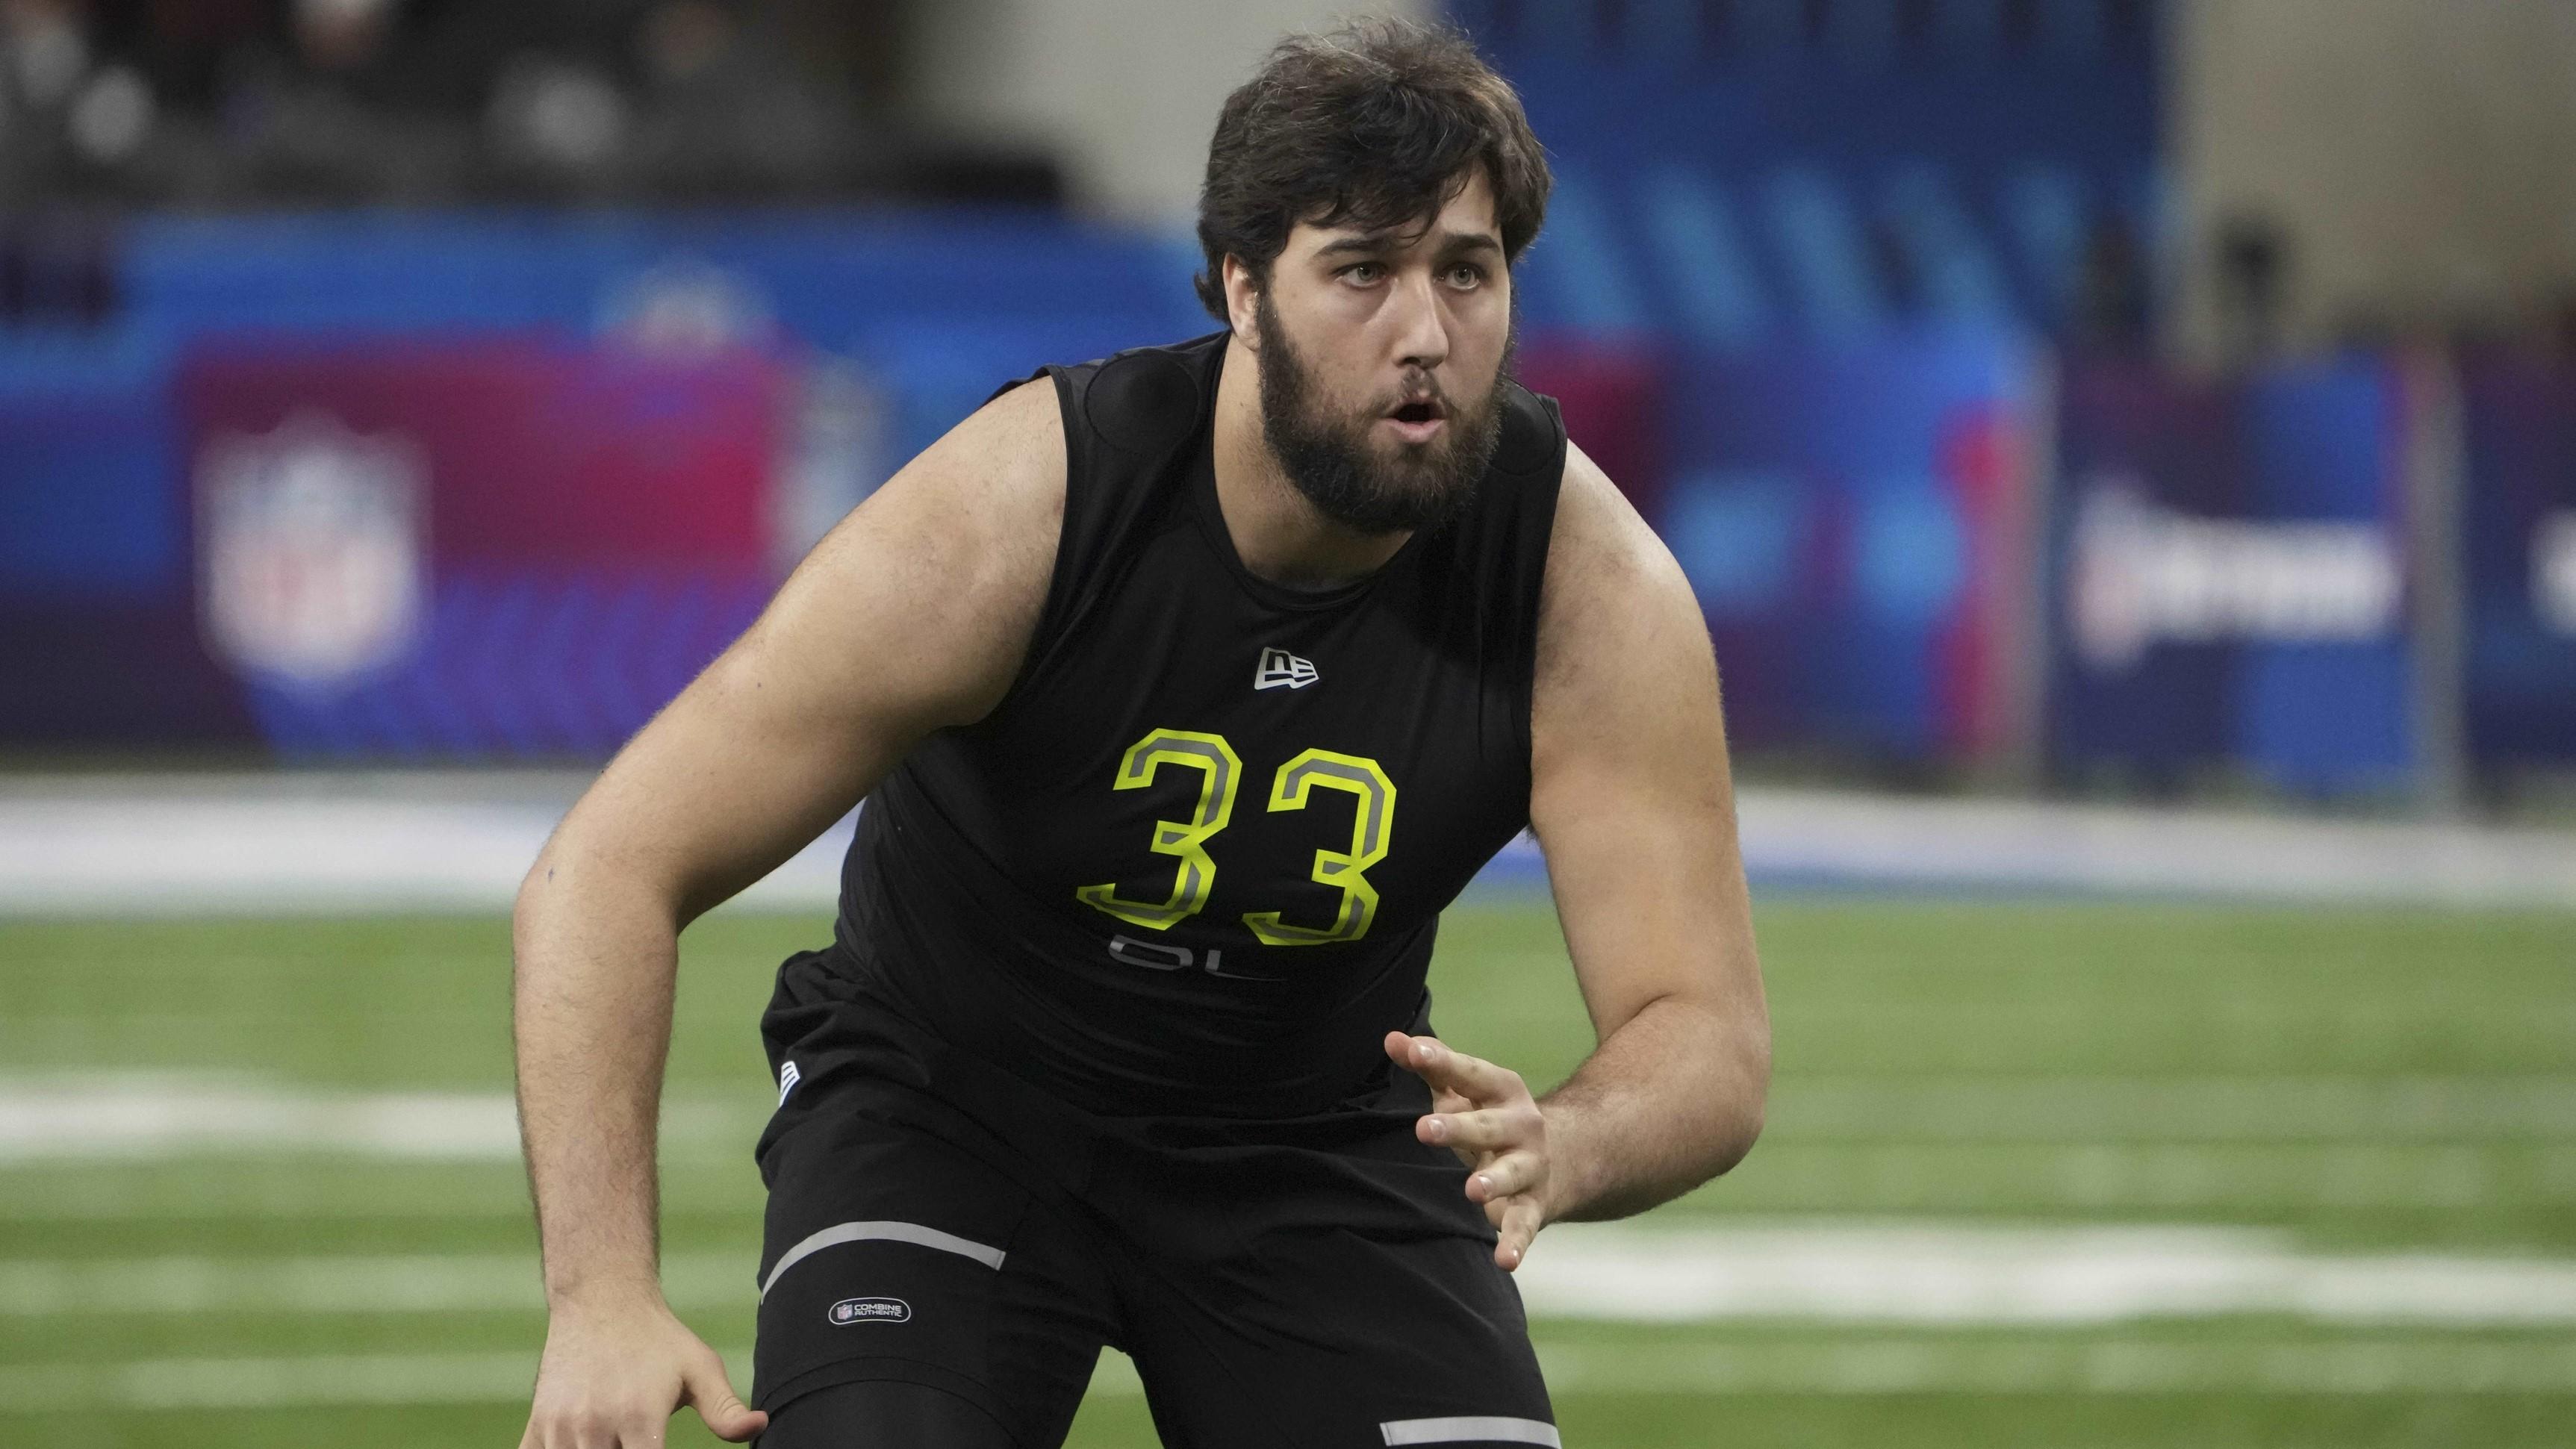 Mar 4, 2022; Indianapolis, IN, USA; Louisiana-lafayette offensive lineman Max Mitchell (OL33) goes through drills during the 2022 NFL Scouting Combine at Lucas Oil Stadium. / Kirby Lee-USA TODAY Sports